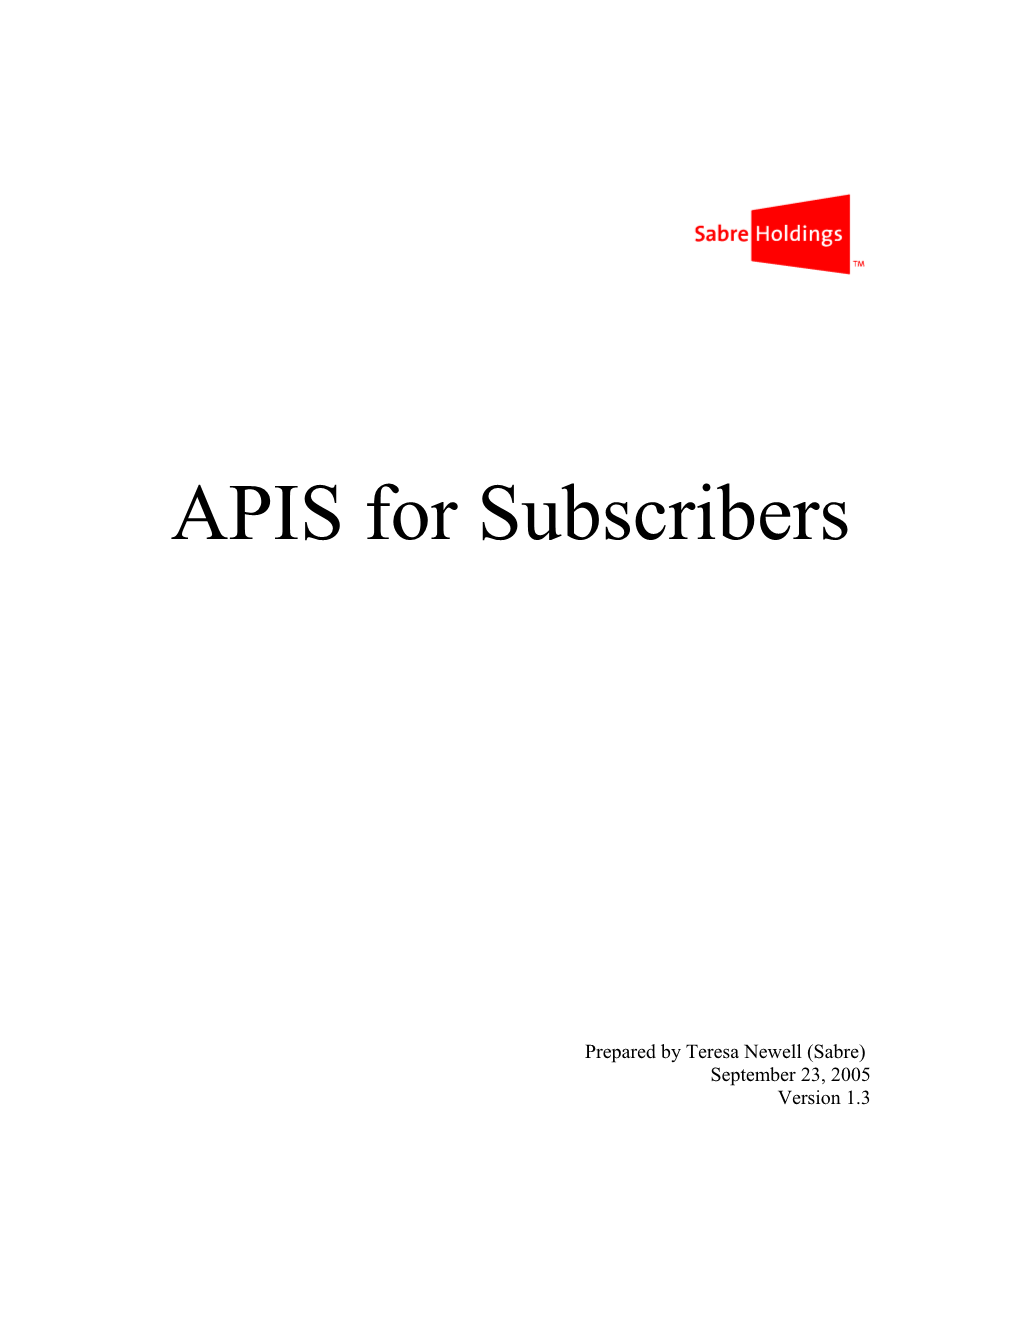 APIS for Subscribers